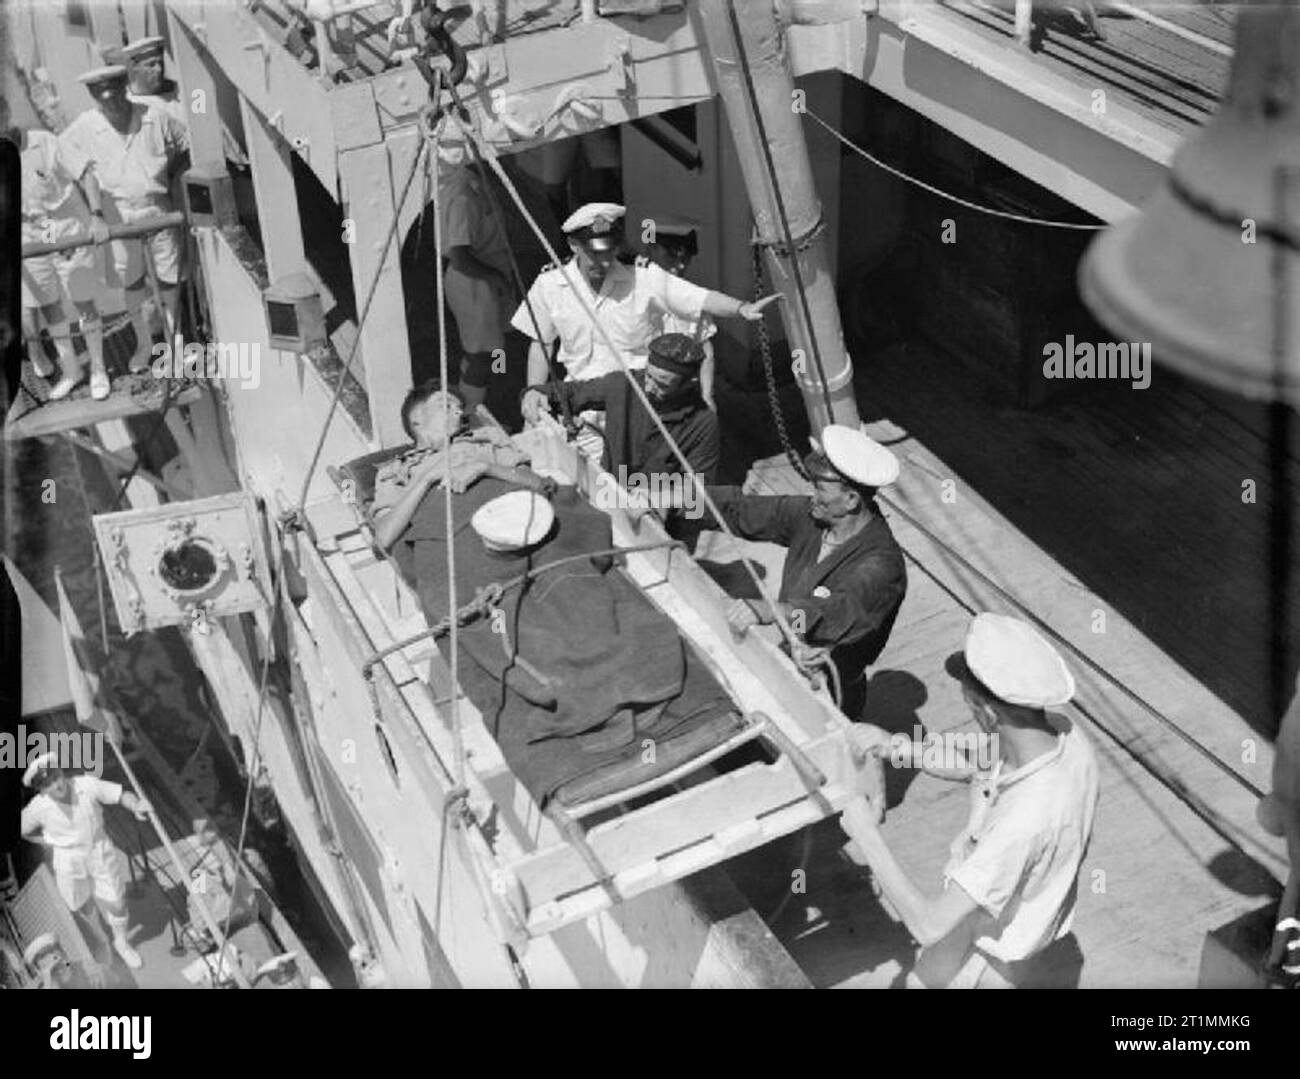 The Royal Navy during the Second World War A patient being hoisted on board HMHS MAINE at Lake Timsah, Ismalia, Suez Canal. Stock Photo